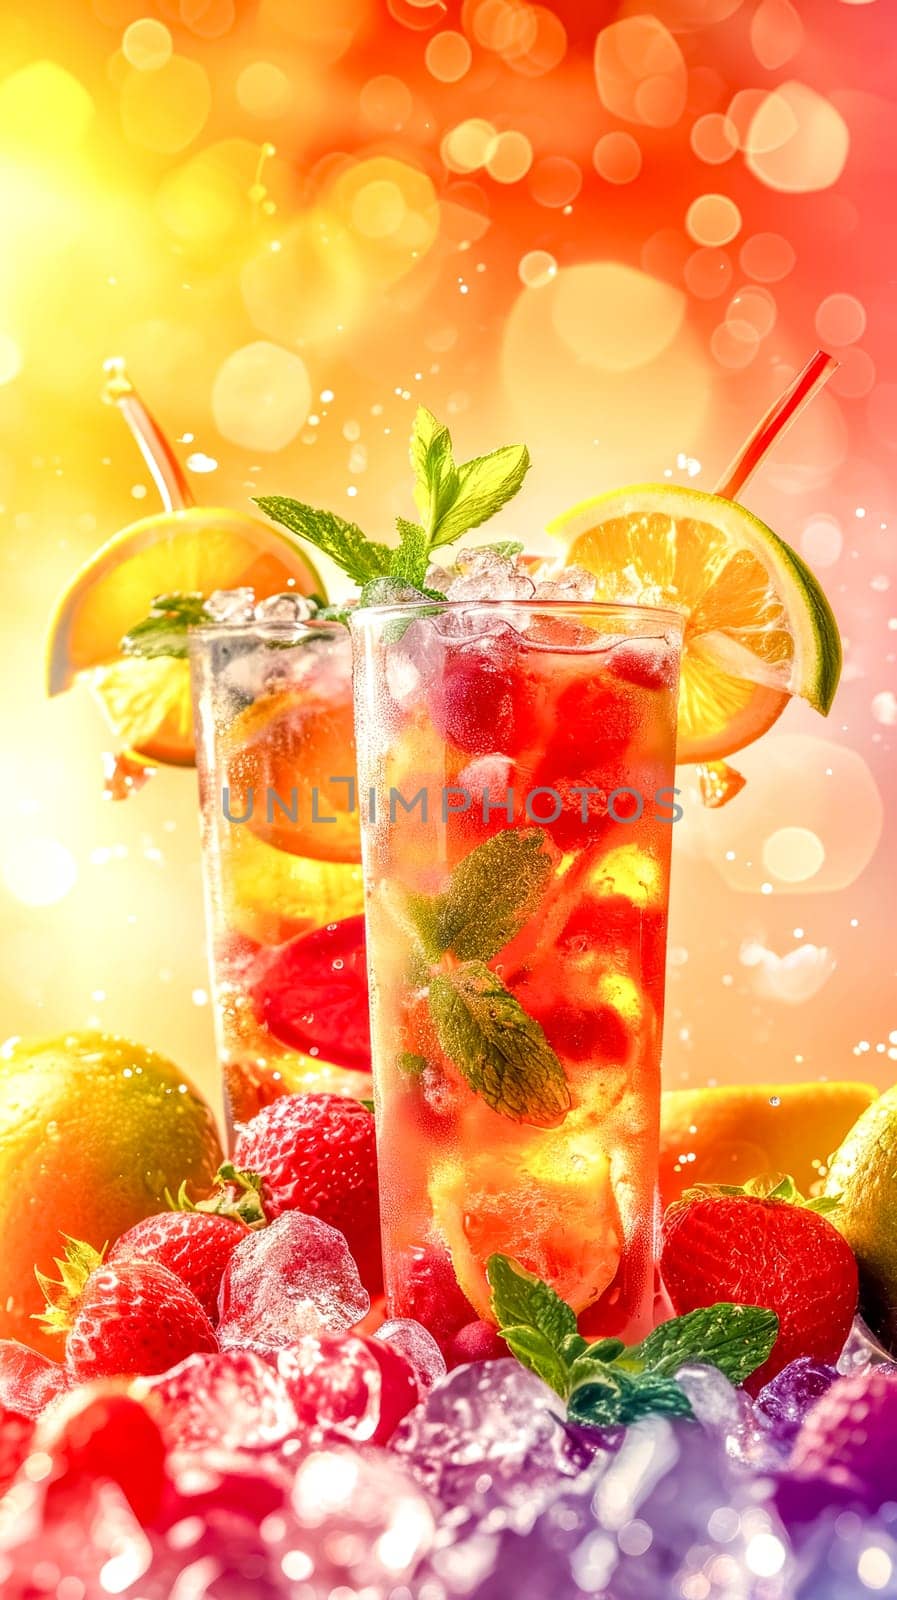 Refreshing summer drinks with ice, strawberries, and mint in a vibrant, sunny setting. by Edophoto